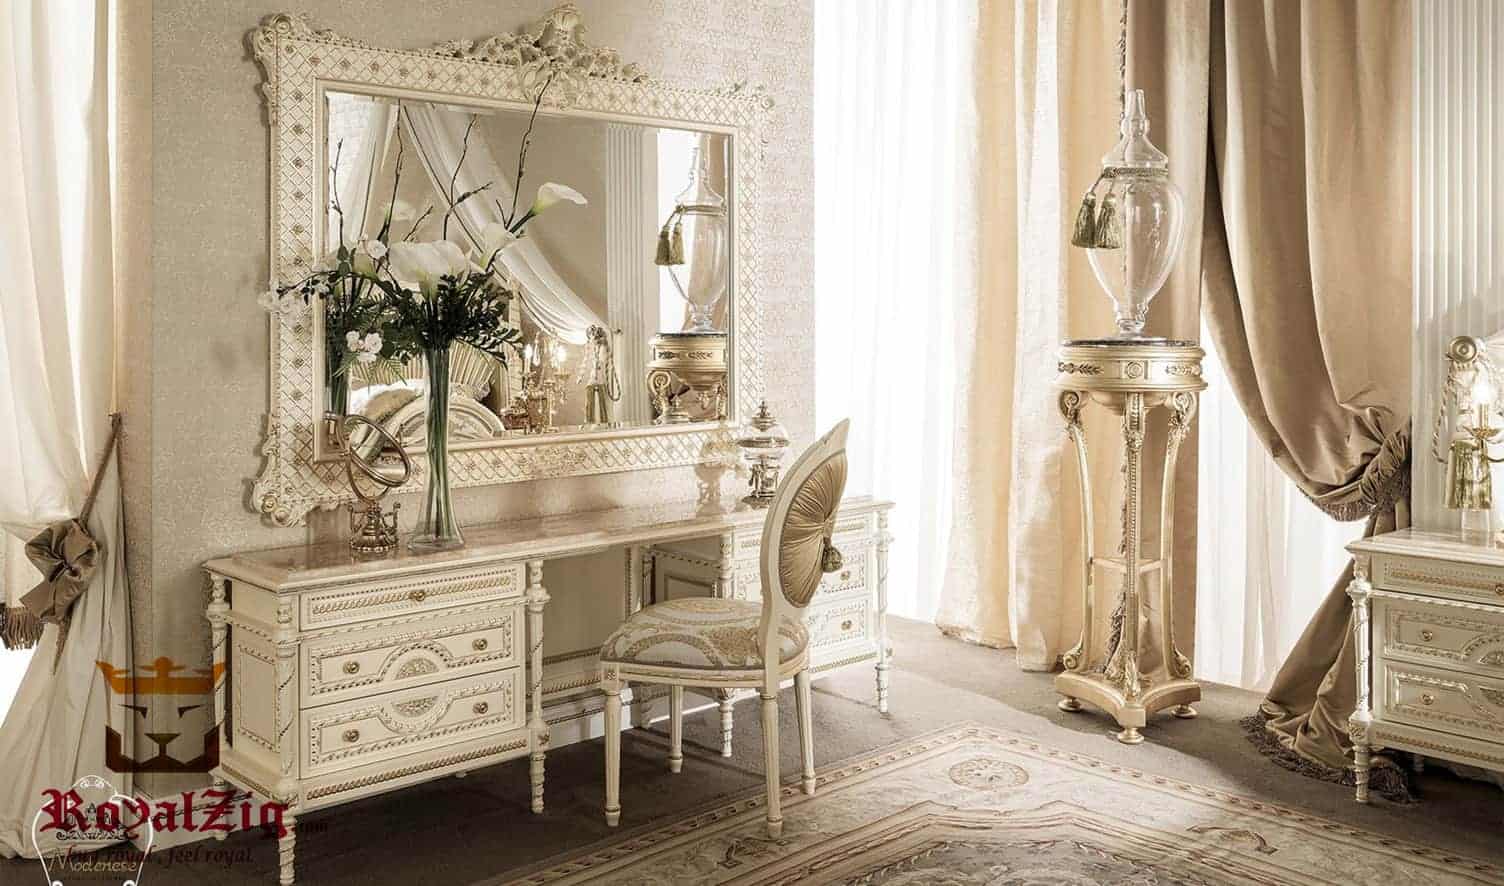 An exquisite royal dresser with a huge mirror, lots of storage space, and a matching chair, in a white well-furnished room.